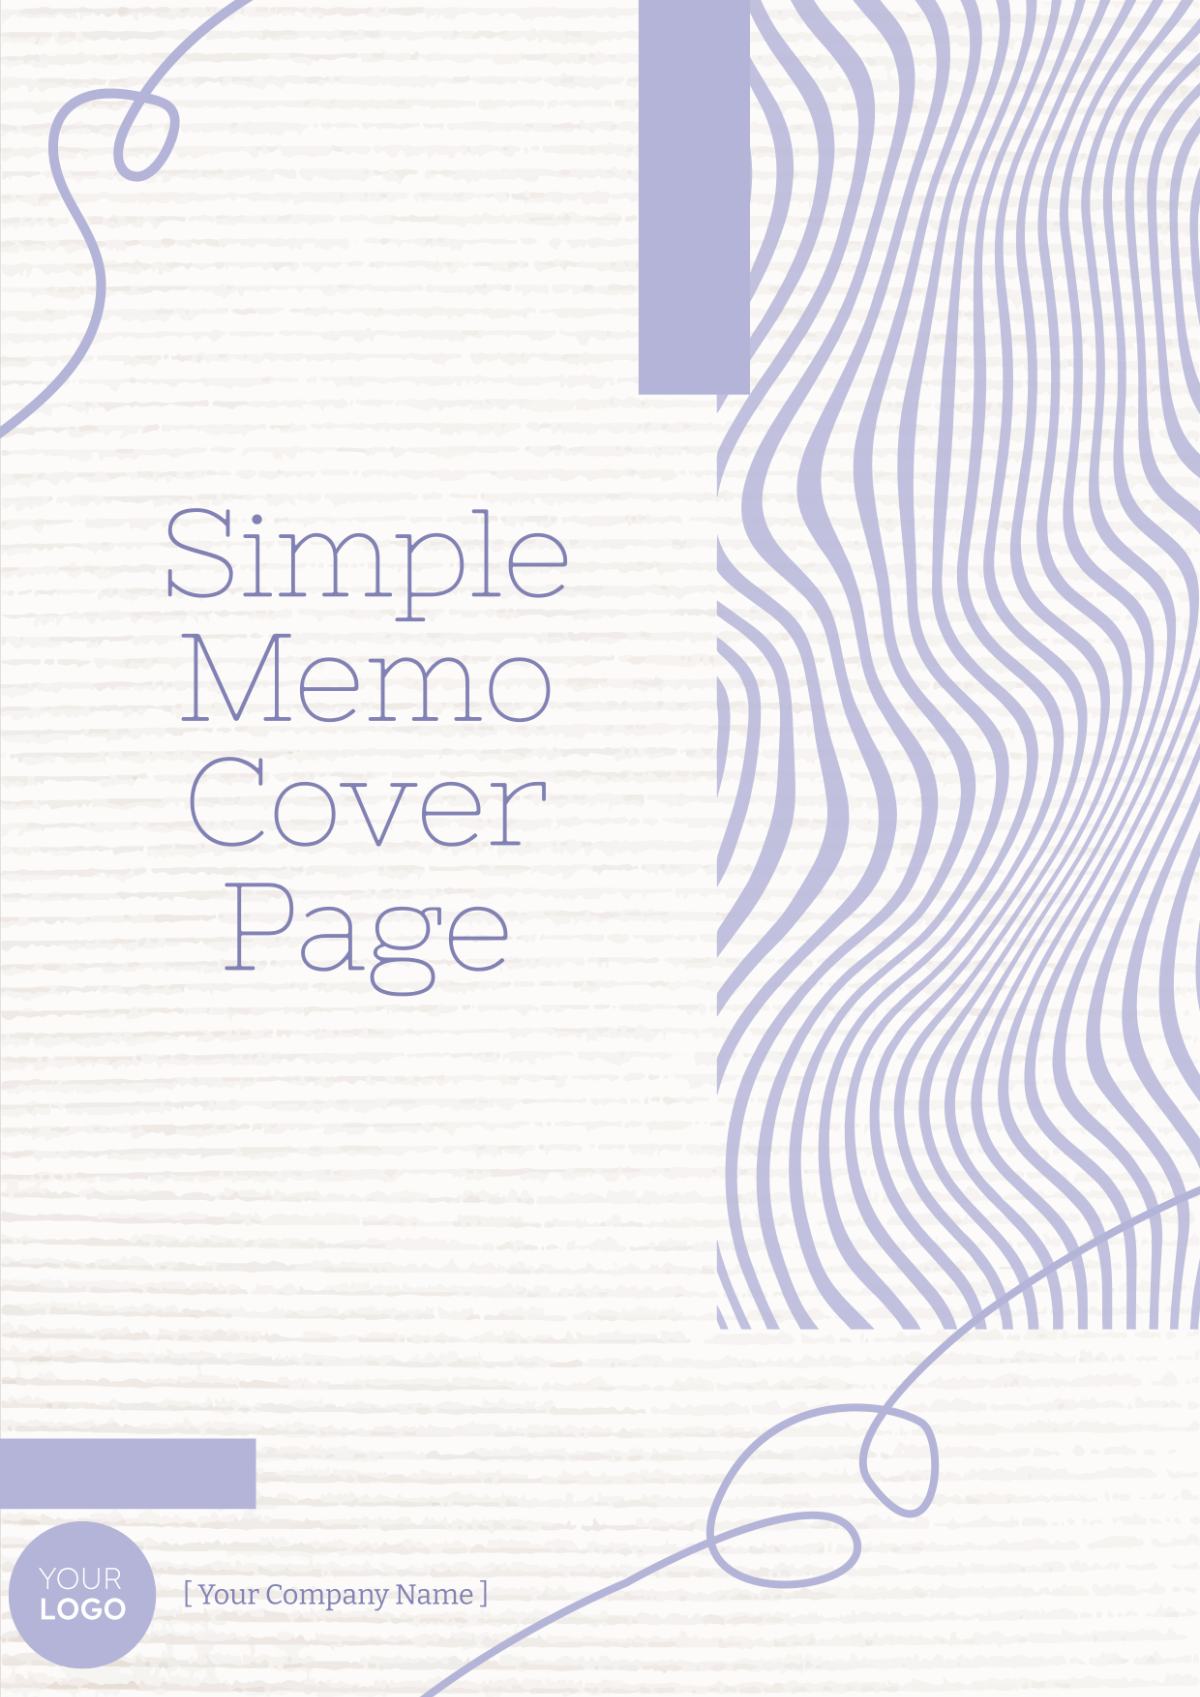 Simple Memo Cover Page